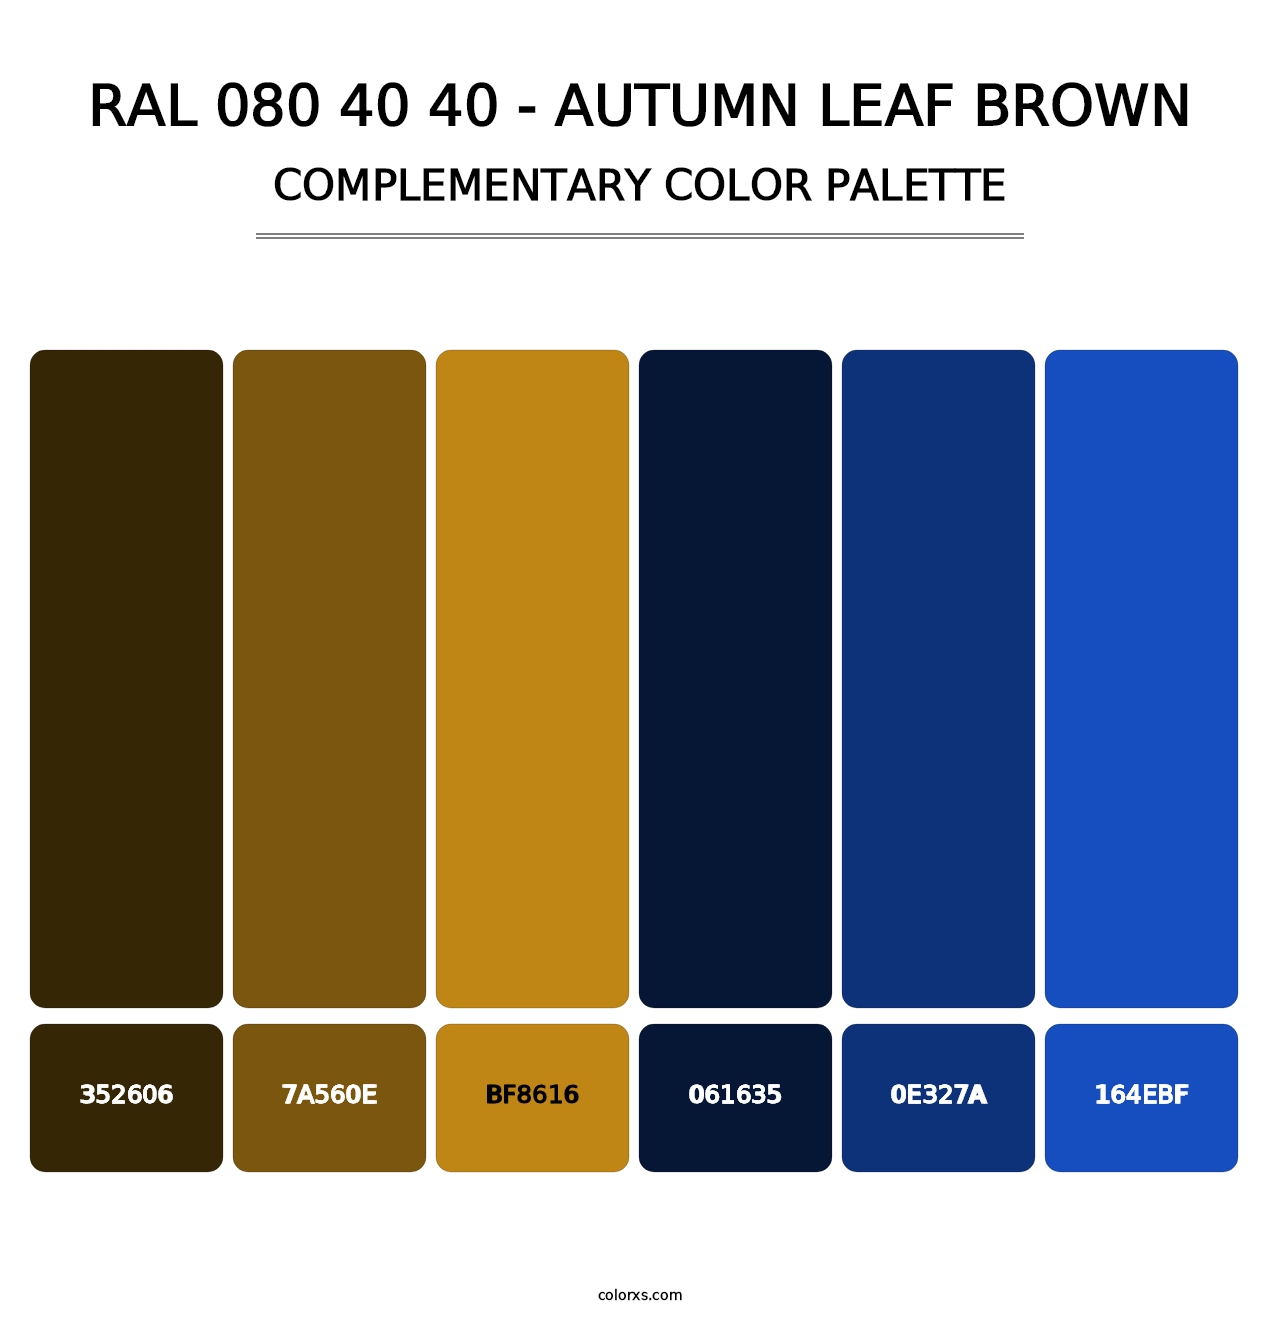 RAL 080 40 40 - Autumn Leaf Brown - Complementary Color Palette